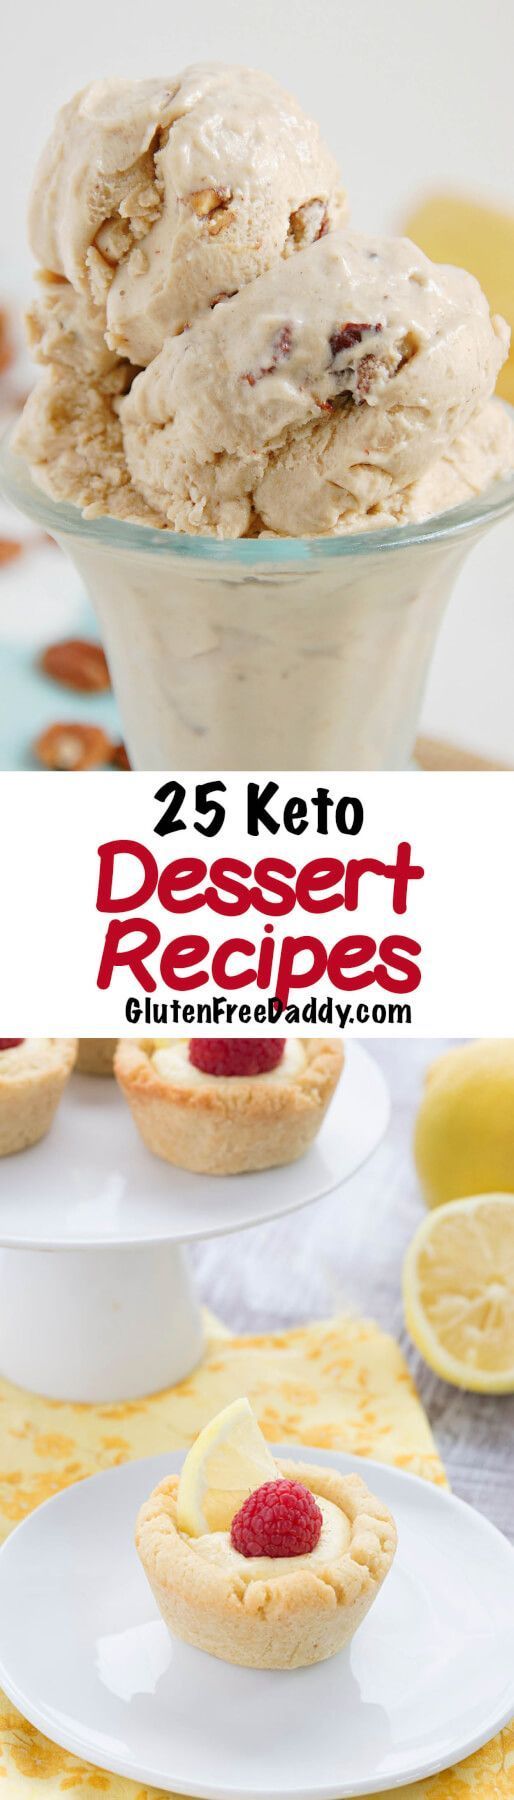 Can you believe all these dessert recipes are Keto? Guess the Keto diet isn’t as bad as I thought. I may just have to give these